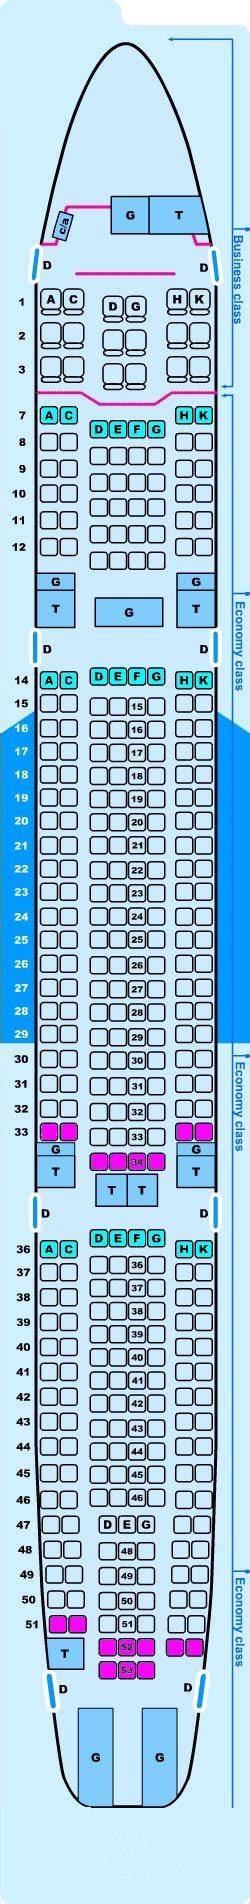 A330-300 airbus seating chart. For your next American Airlines flight, use this seating chart to get the most comfortable seats, legroom, and recline on . American Airlines Airbus A330-200 (332) Seat Map; Info; Photos; Click any seat for more information. Key ... 